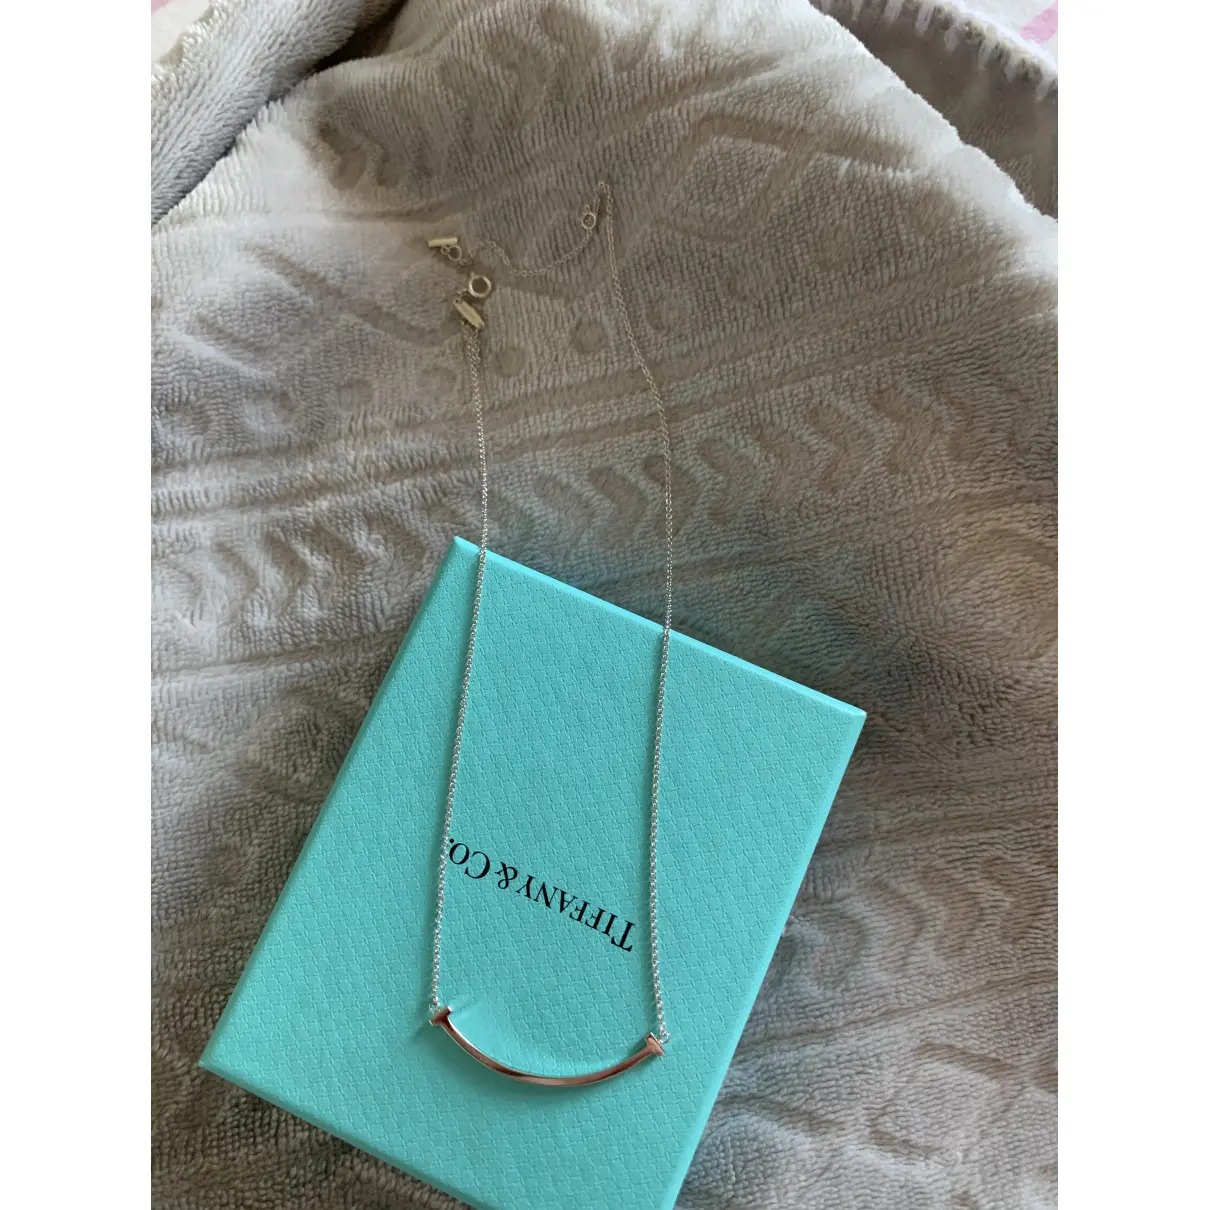 Buy Tiffany & Co White gold necklace online